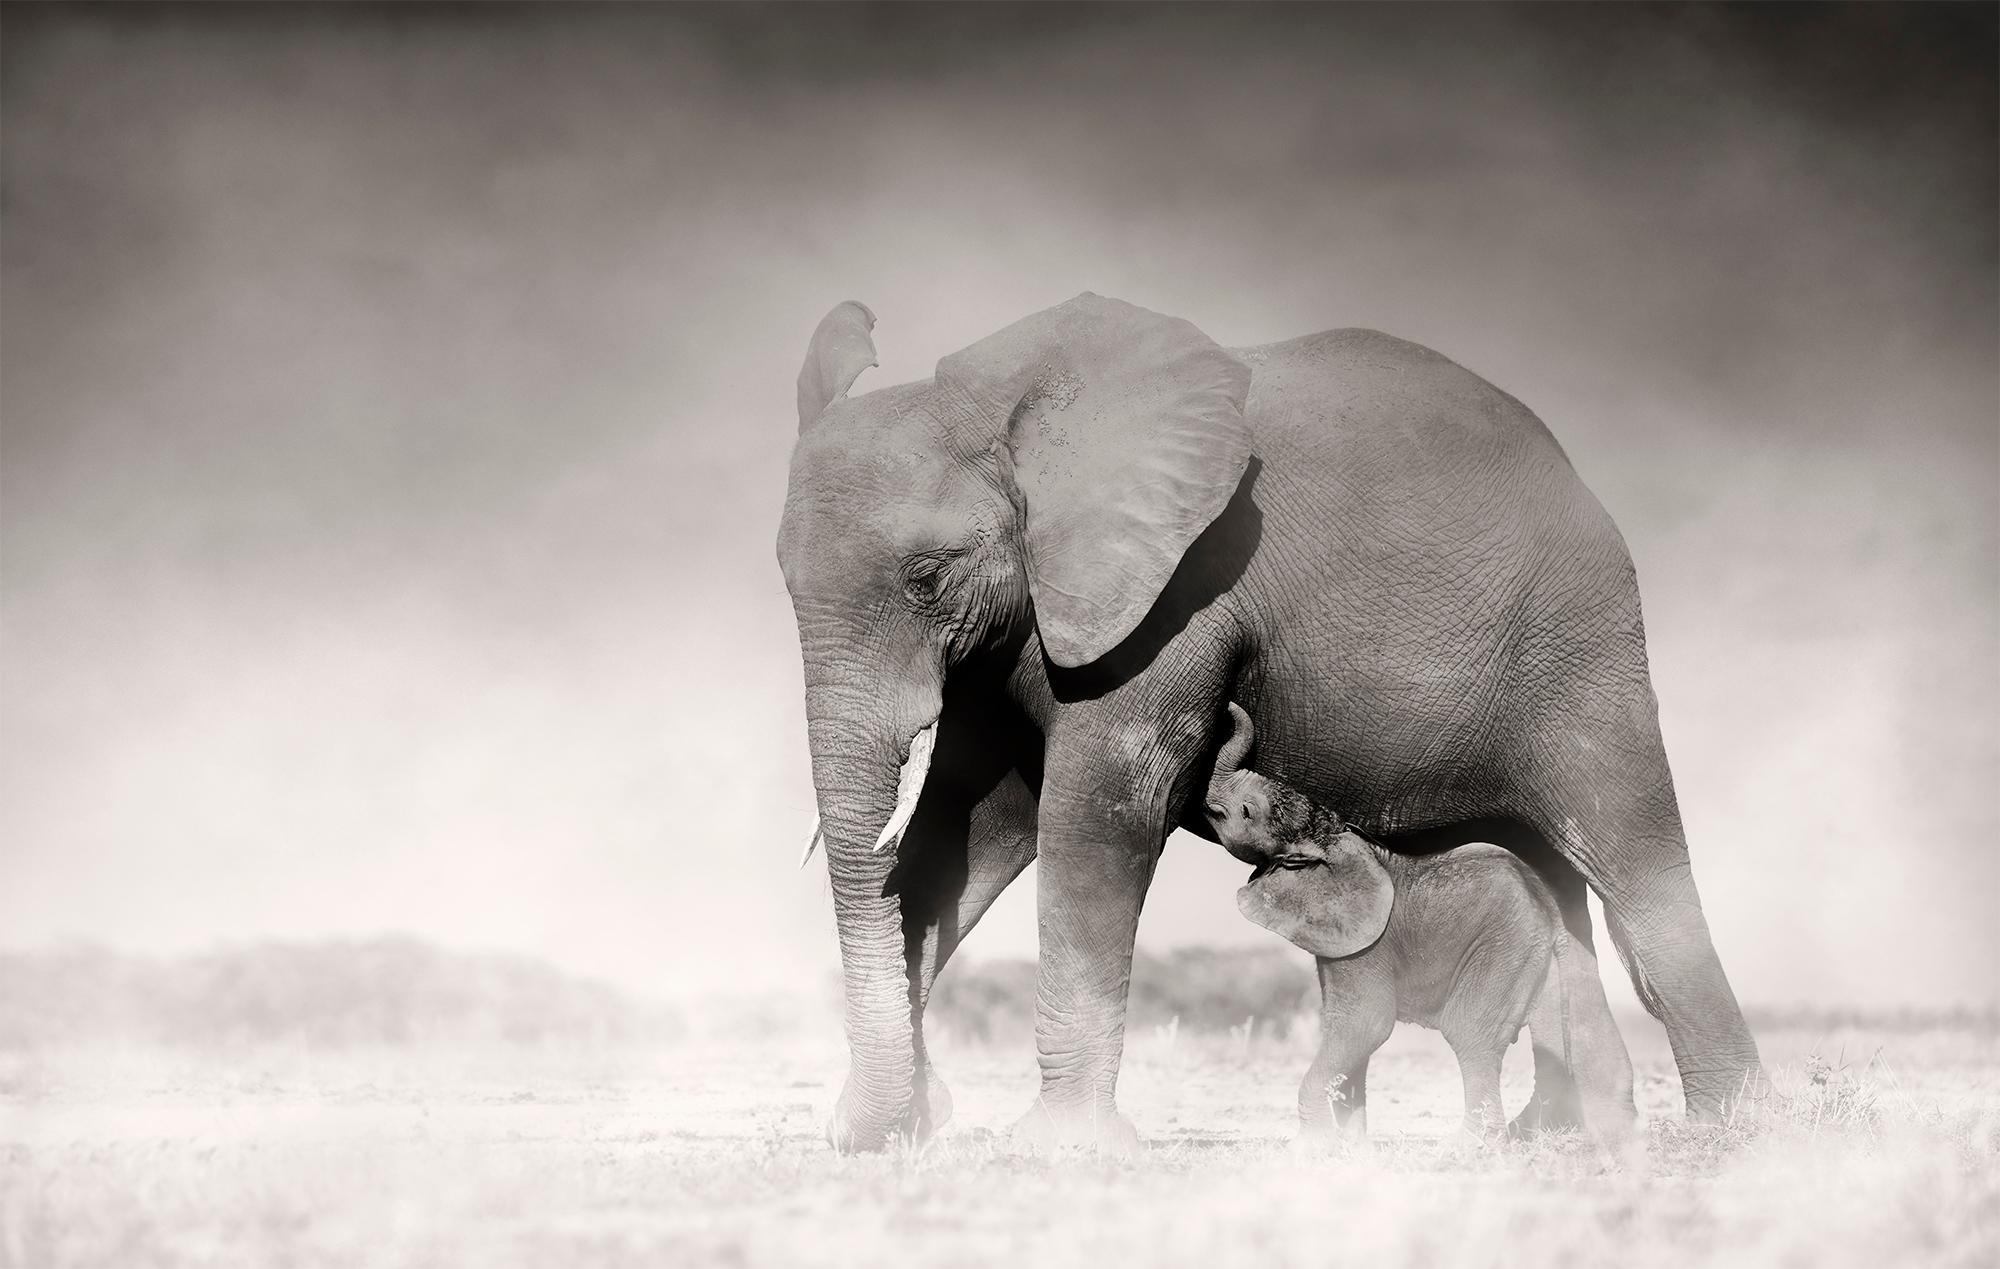 Joachim Schmeisser Black and White Photograph - Connected II, Kenya, animal, wildlife, black and white photography, elephant